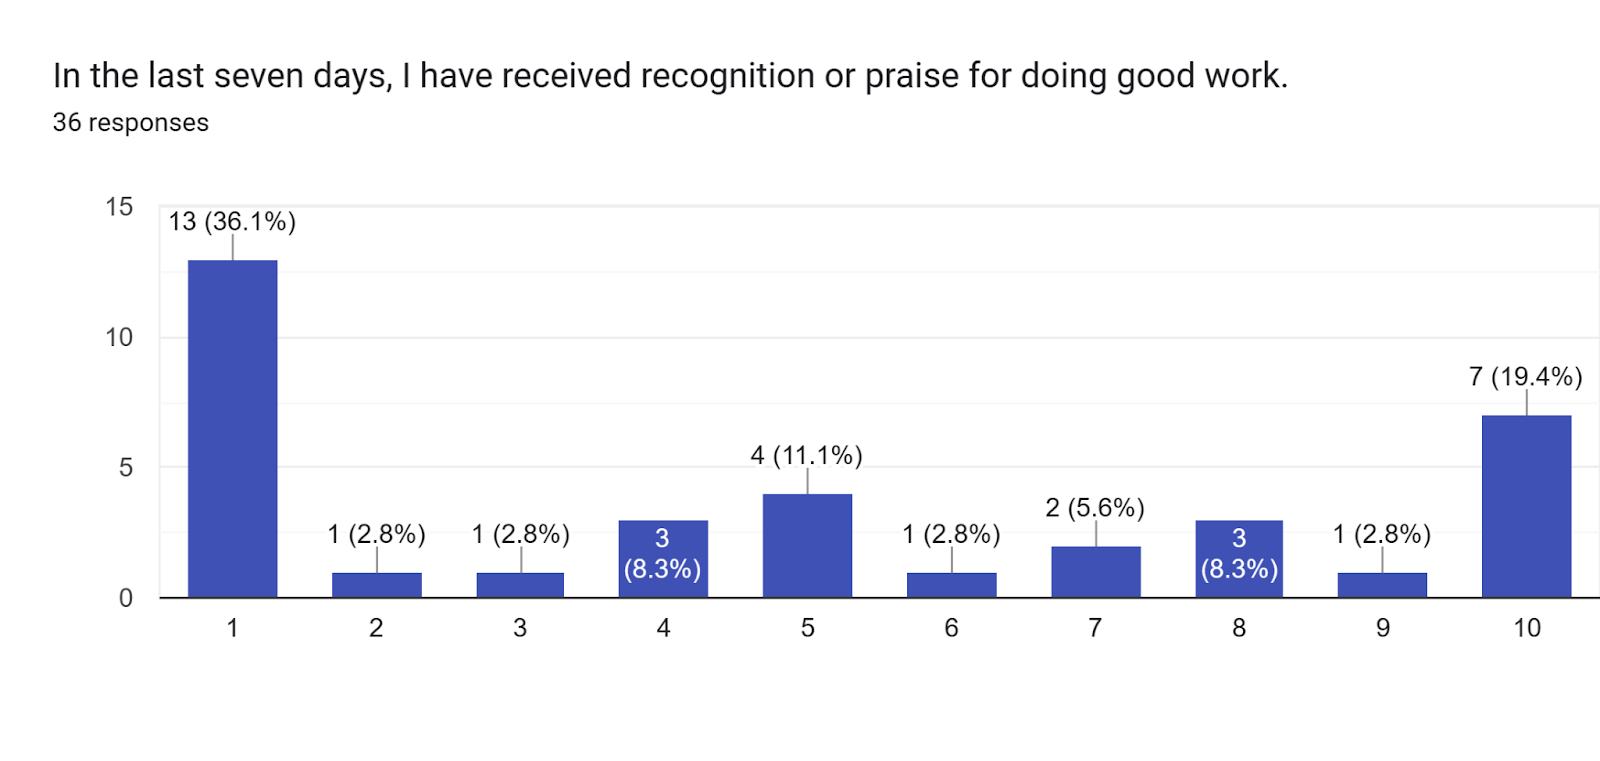 Forms response chart. Question title: In the last seven days, I have received recognition or praise for doing good work.. Number of responses: 36 responses.